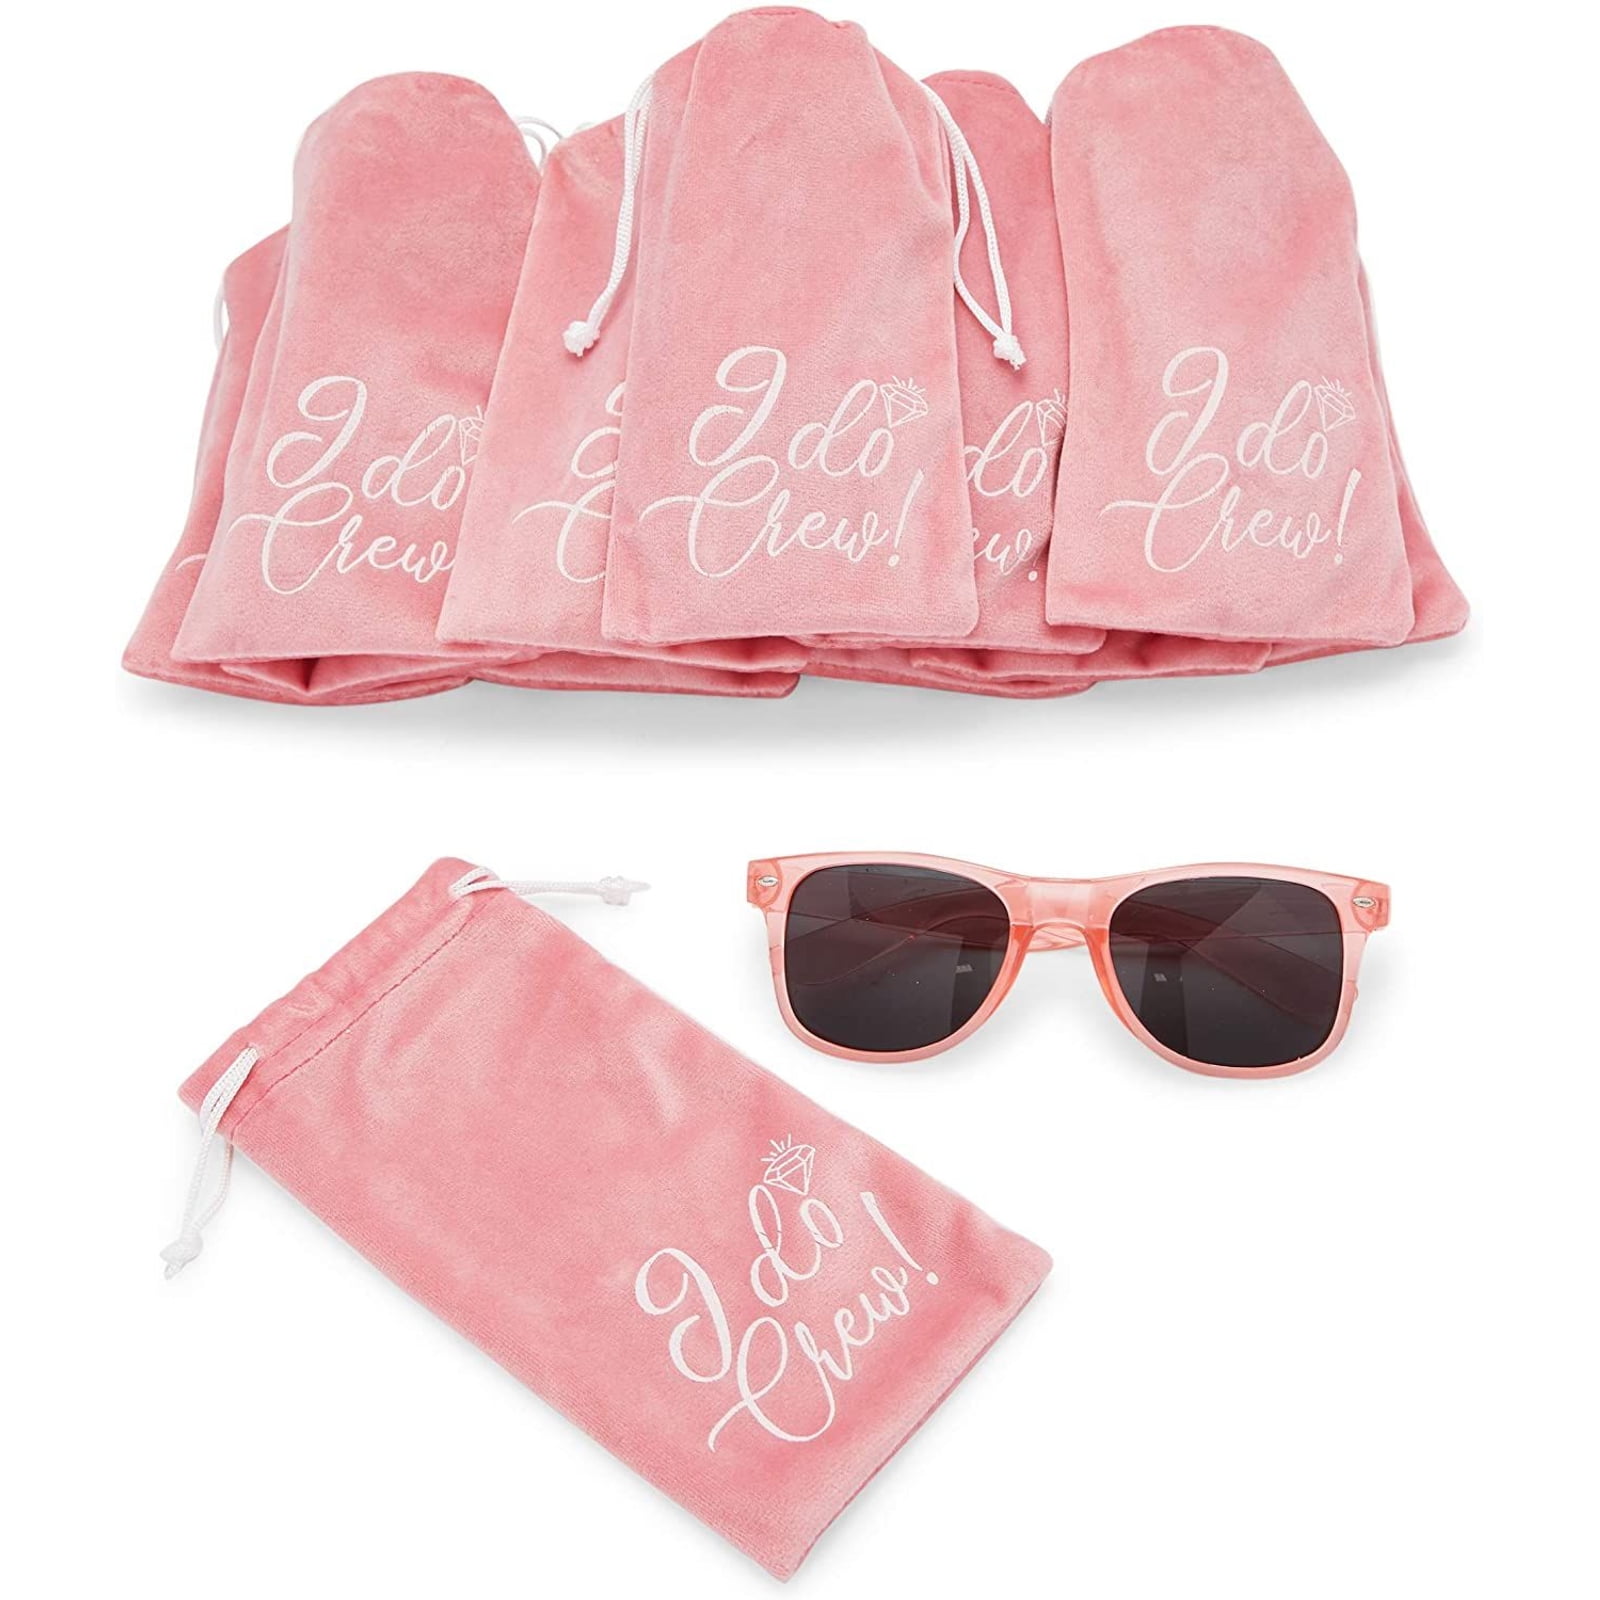 Bachelorette Gifts Bridal Party Gifts Bachelorette Party Gifts Pergozo Bridesmaid Gifts White & Pink Bride to Be Gifts Wayfarer Style Bride and Bridesmaid Sunglasses Set of 6